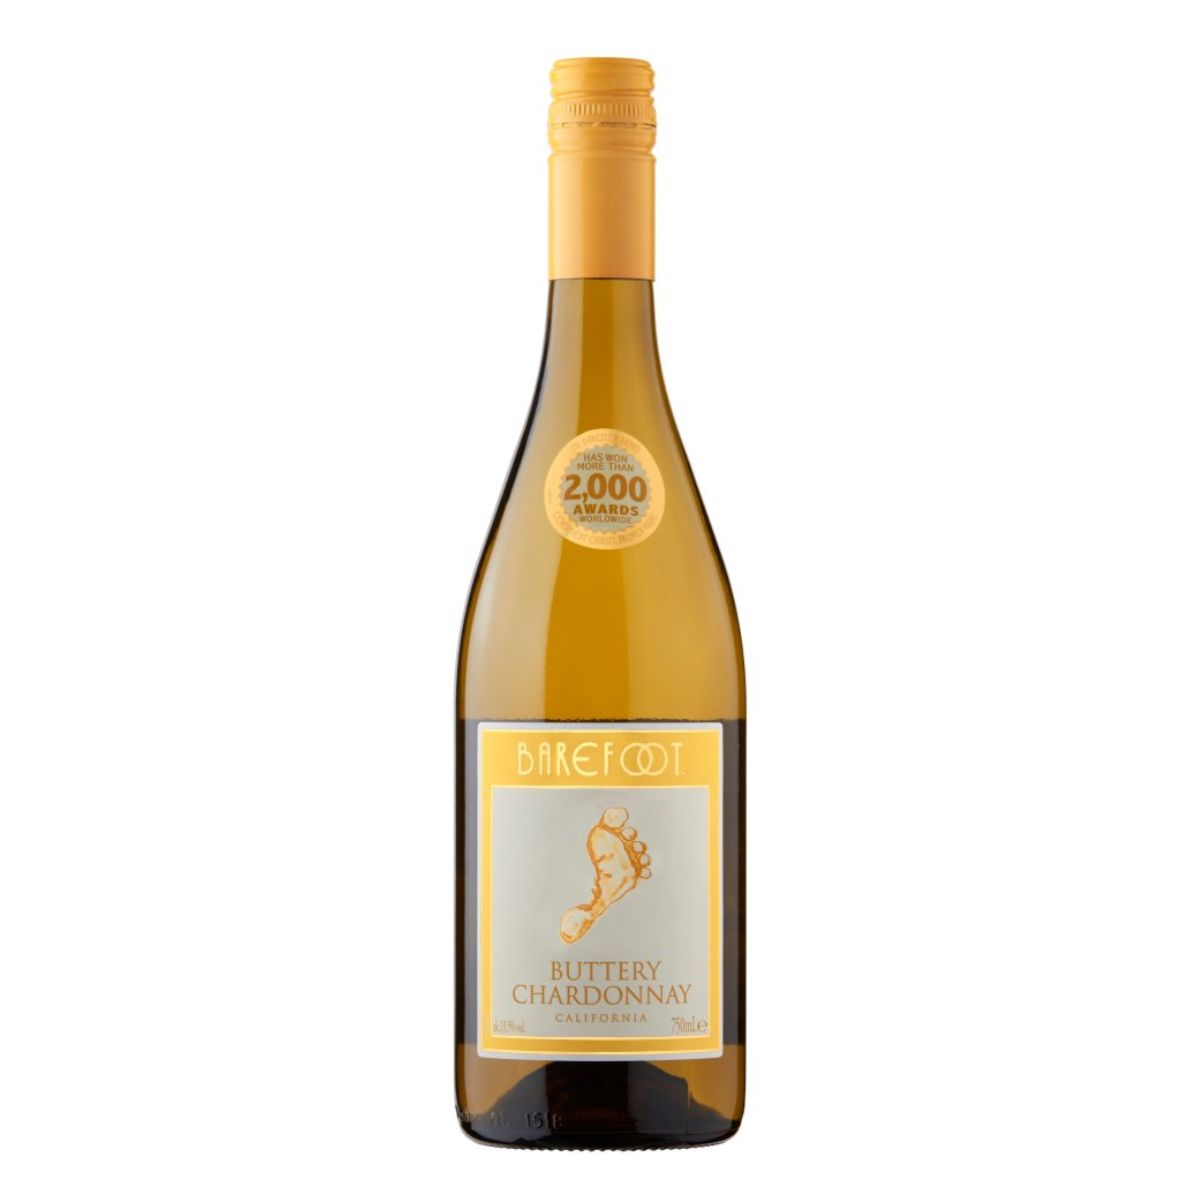 A bottle of Barefoot - Buttery Chardonnay White Wine (13.5% ABV) - 750ml on a white background.